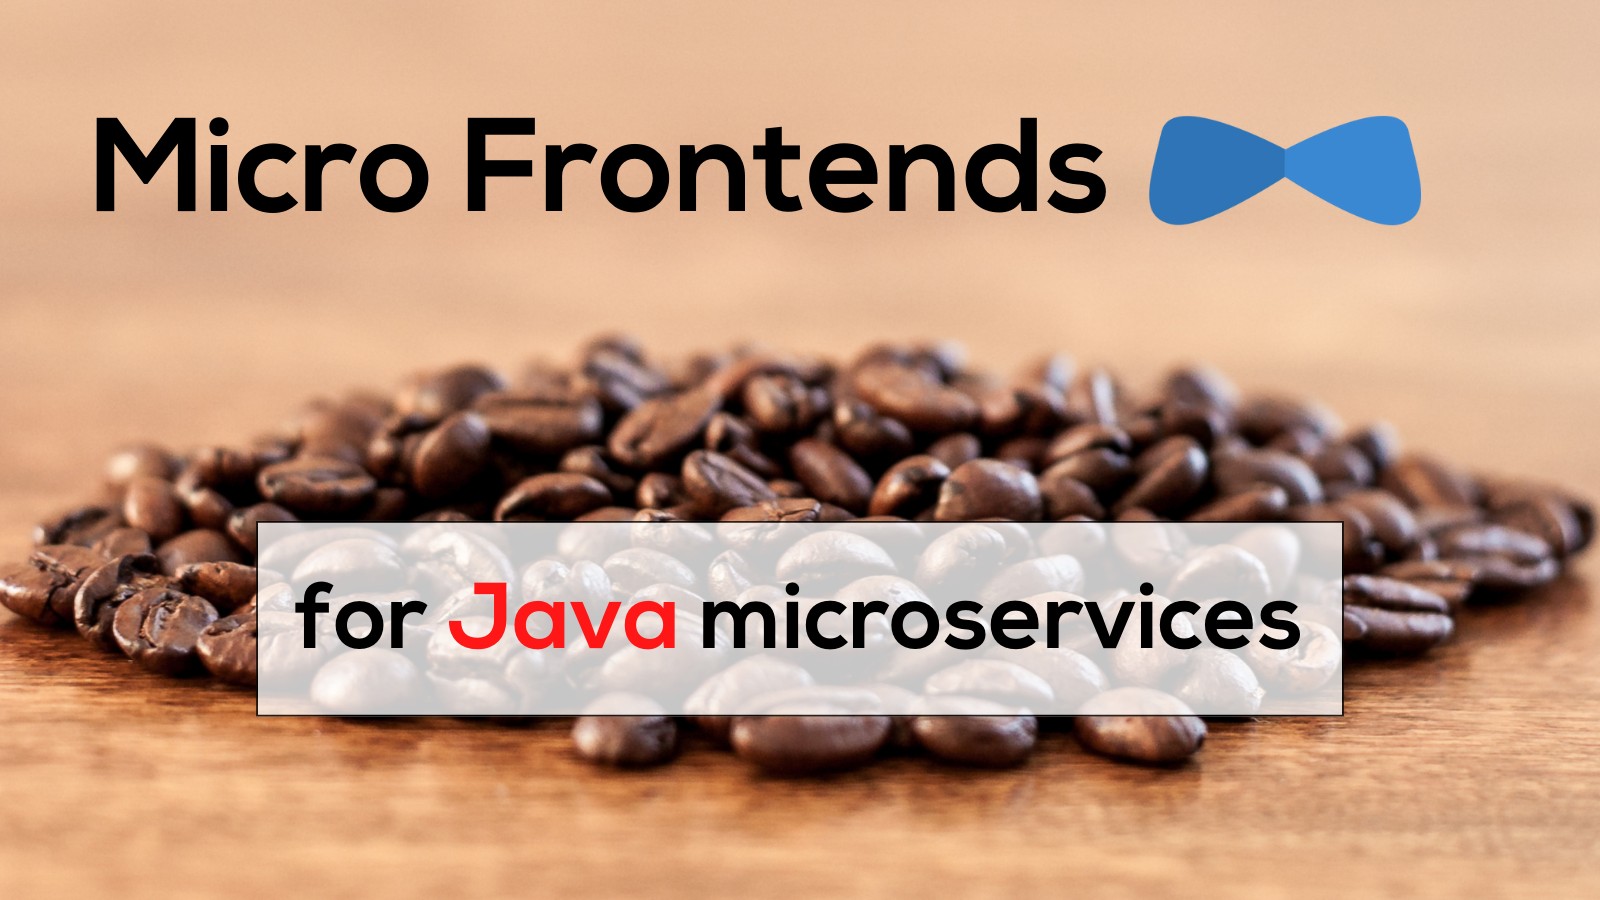 Micro Frontends for Java Microservices